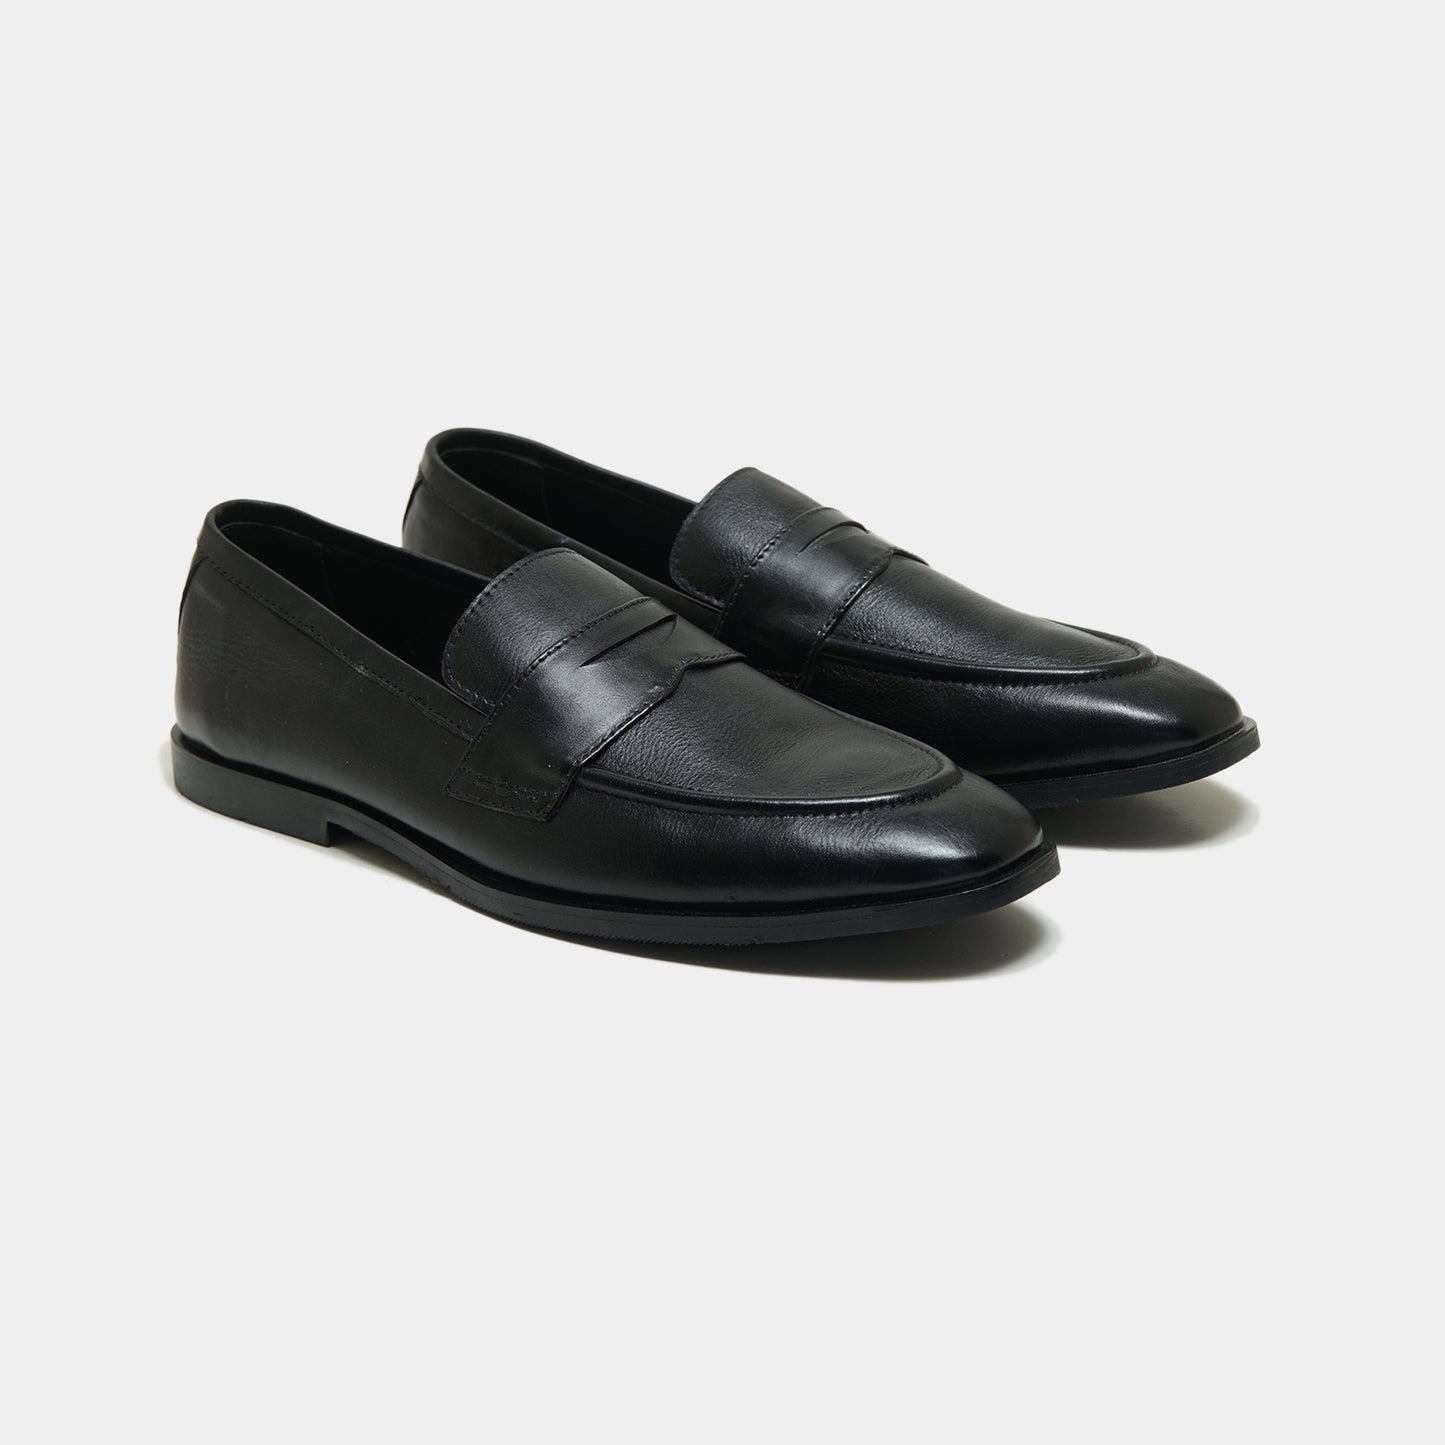 The Everyday Loafer